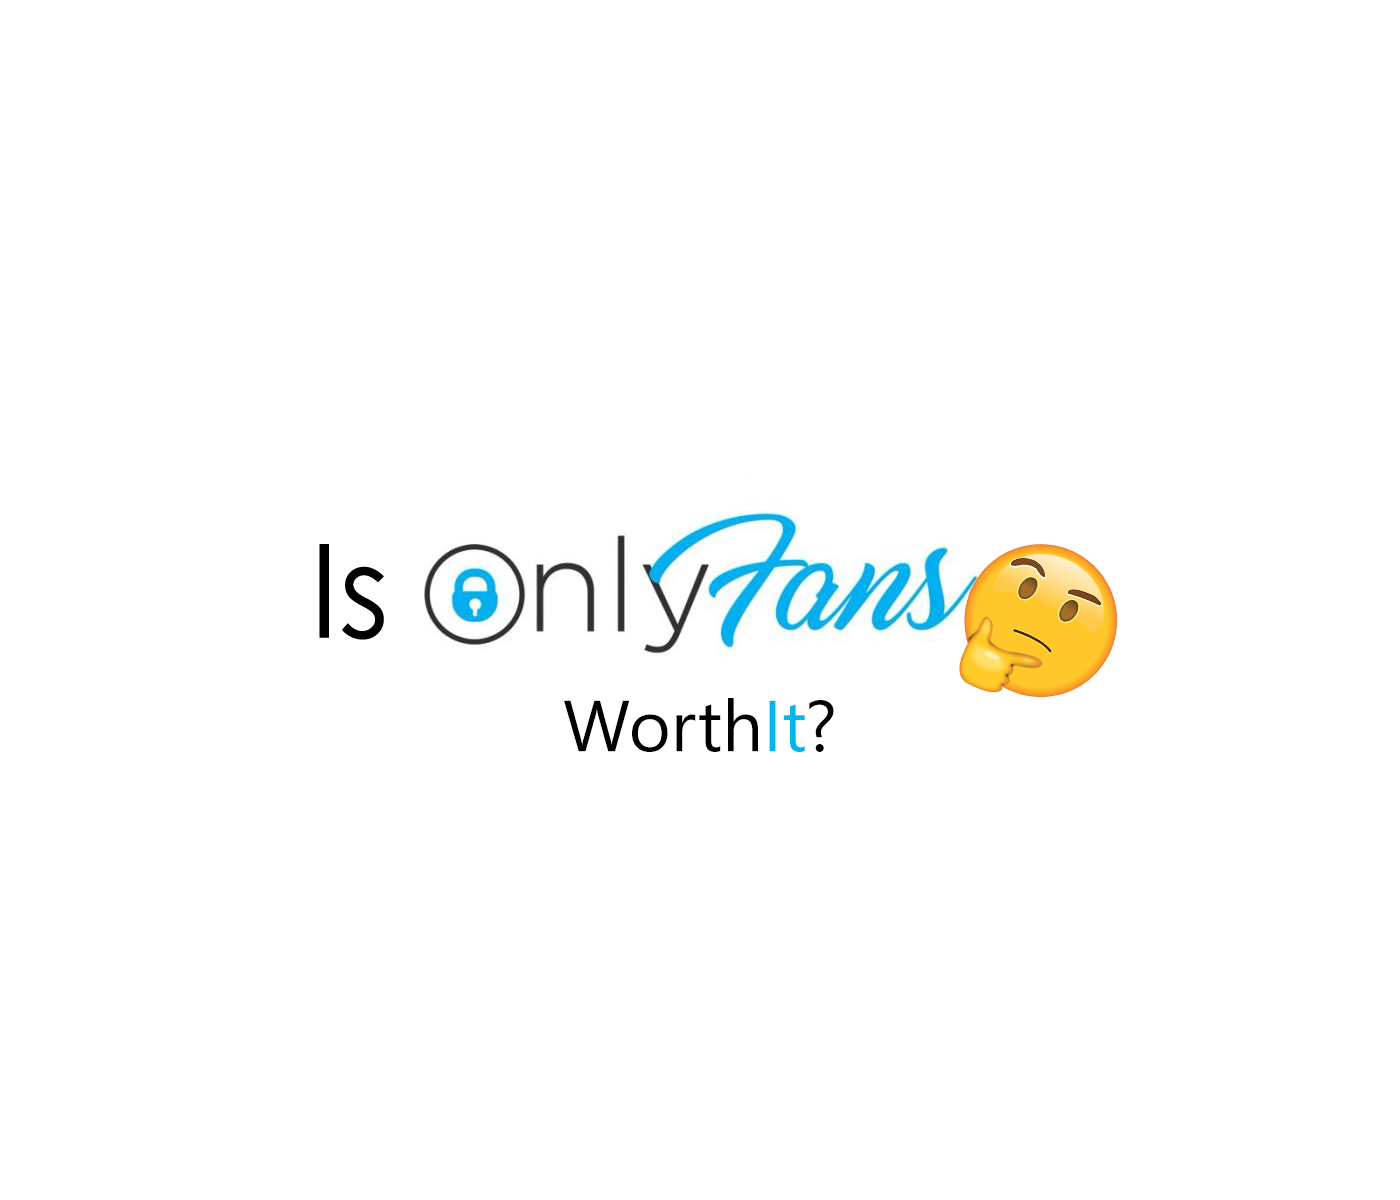 Onlyfanssuserr only fans